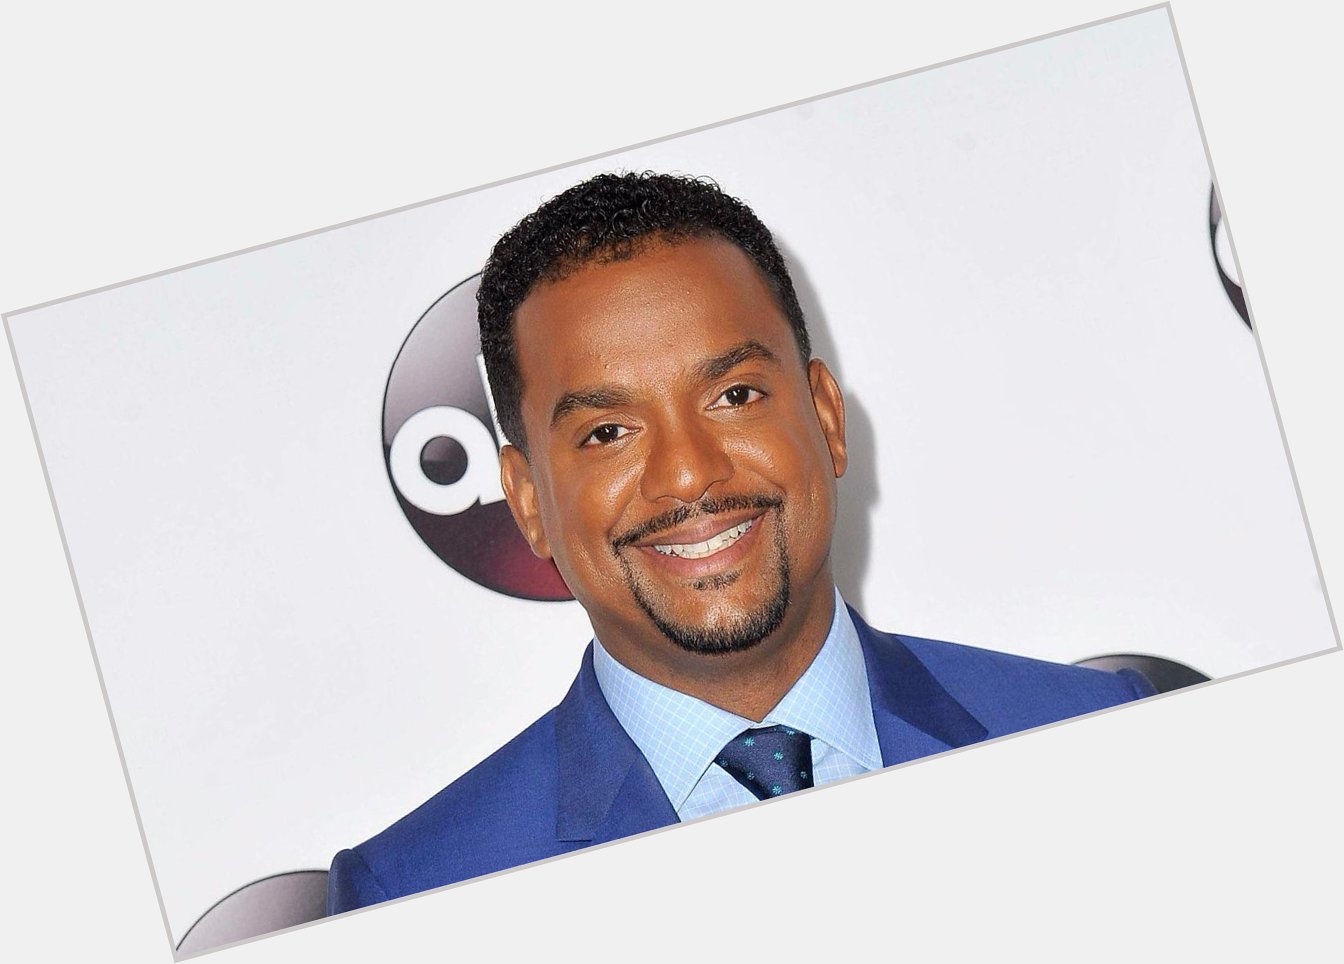 September 21, 2020
Happy birthday to American actor Alfonso Ribeiro 49 years old. 